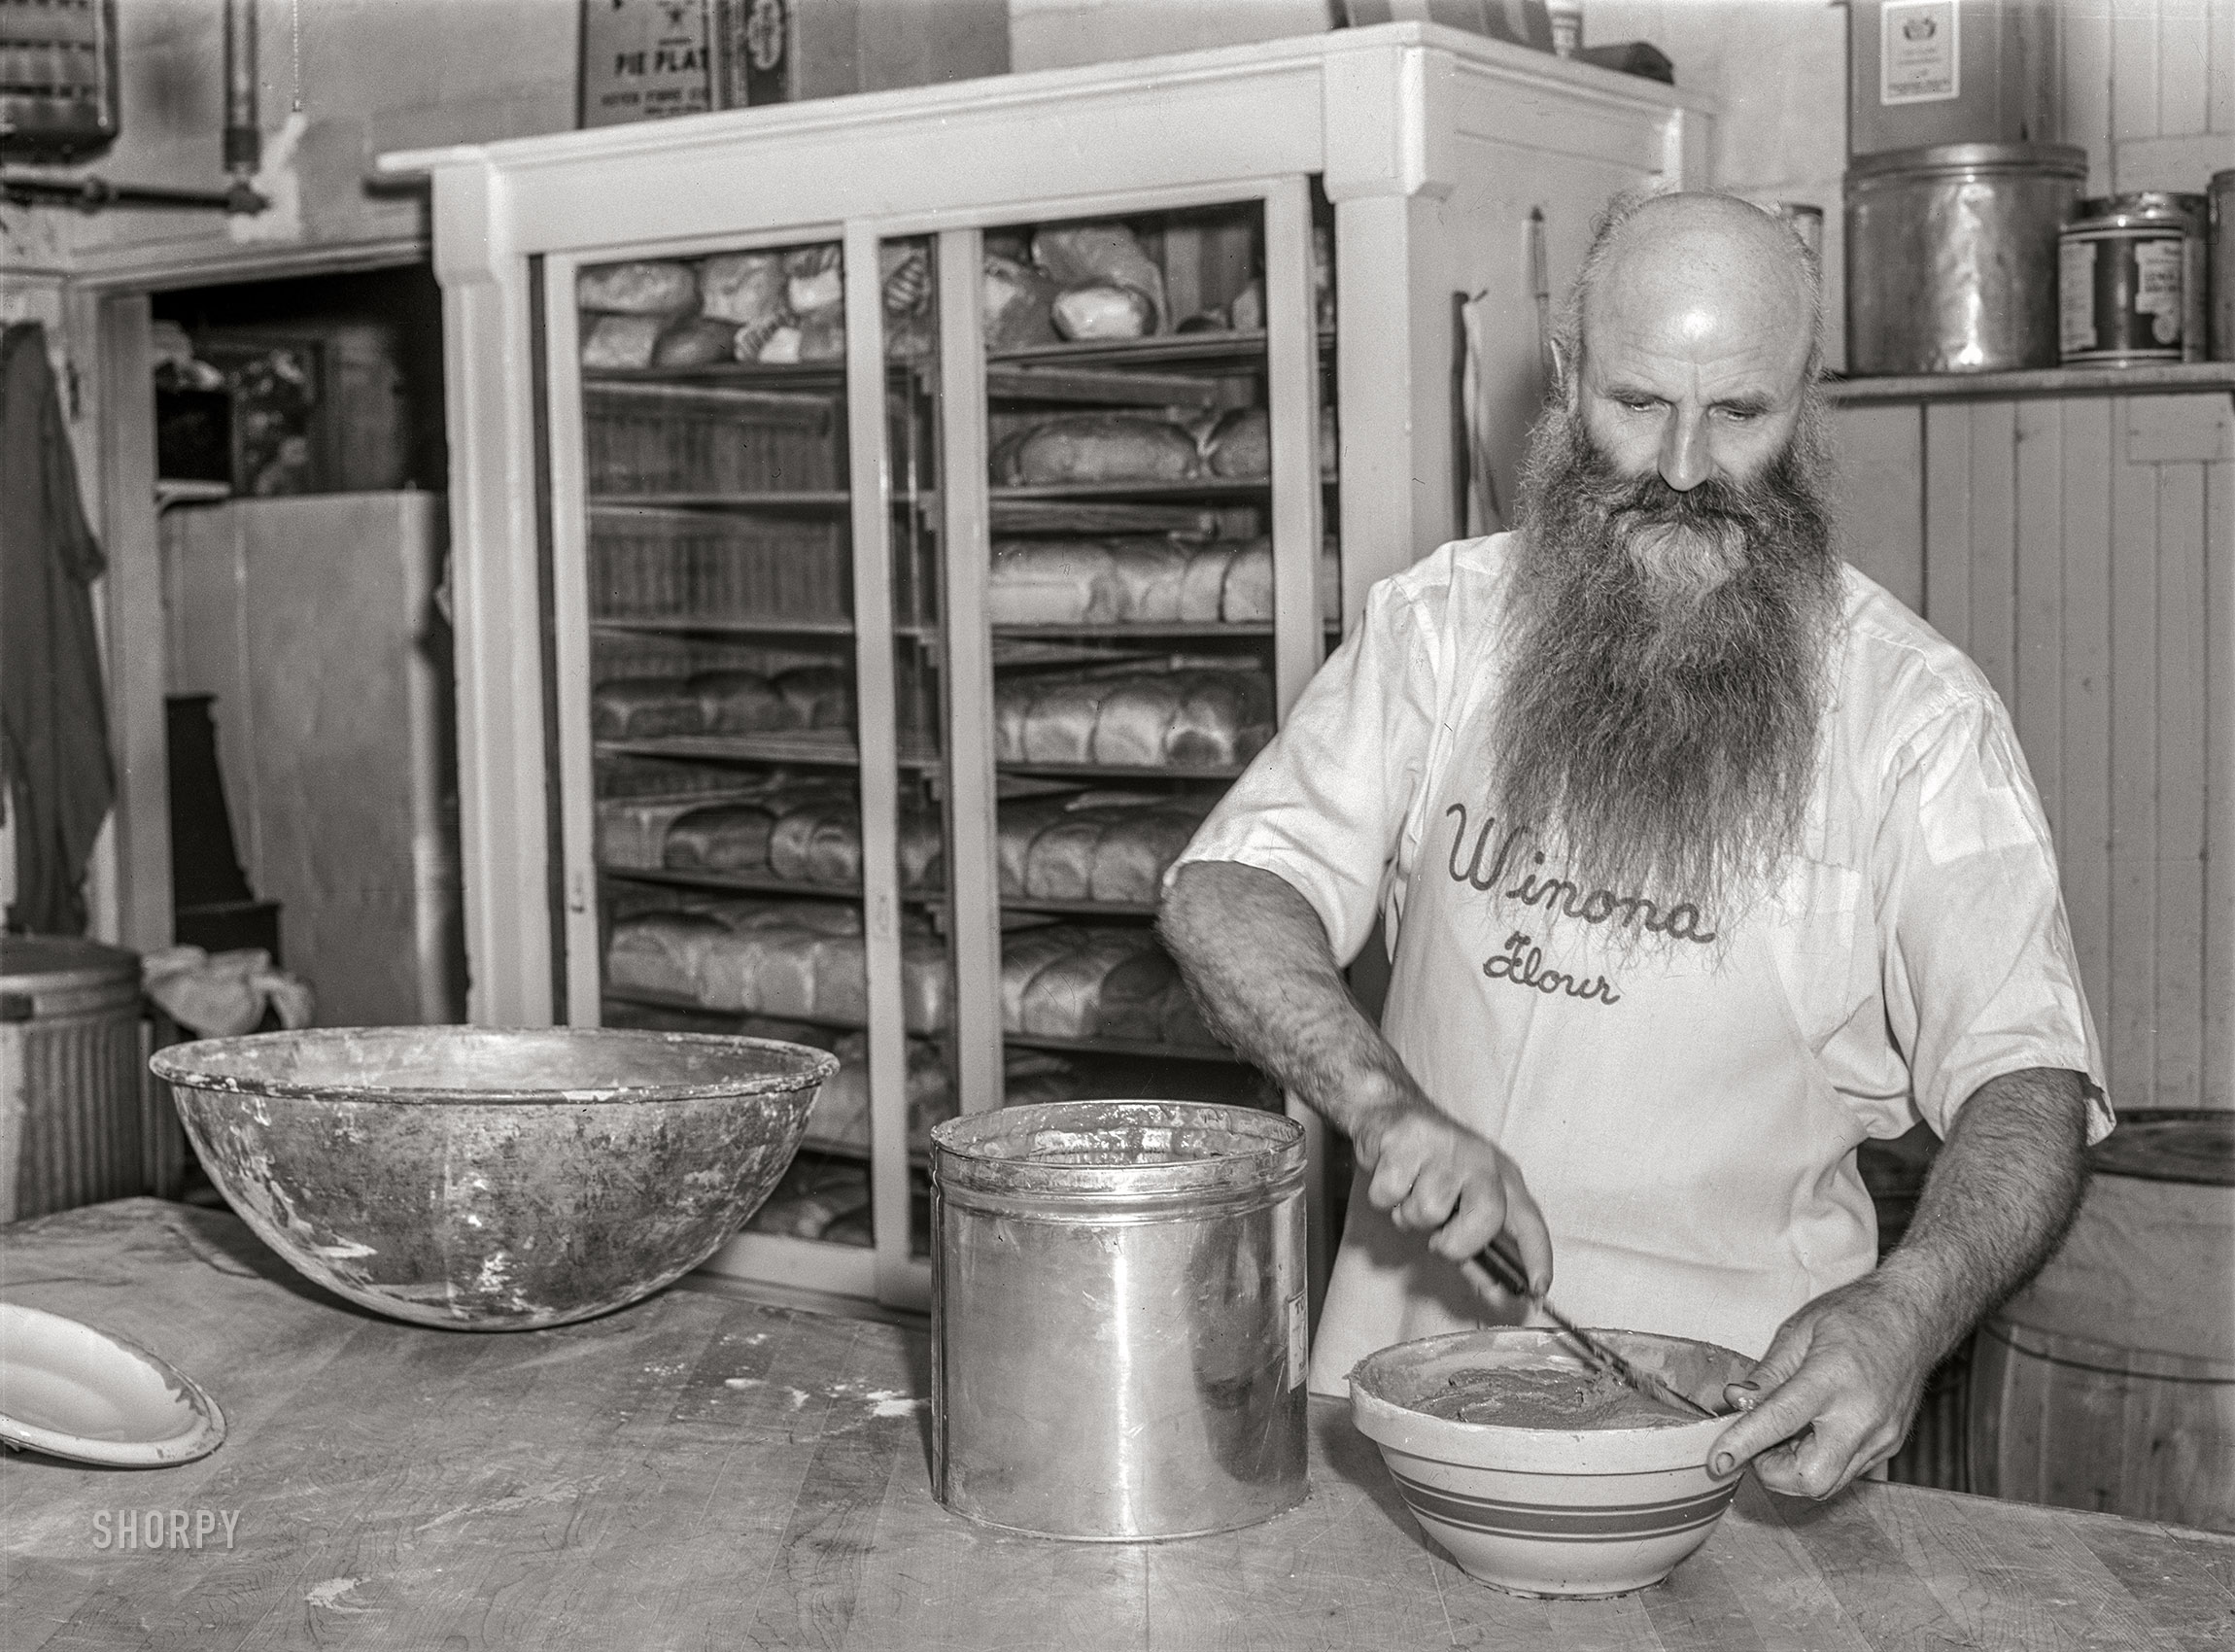 July 1940. Benton Harbor, Michigan. "Baker at the House of David religious community." Acetate negative by John Vachon for the Farm Security Administration. View full size.